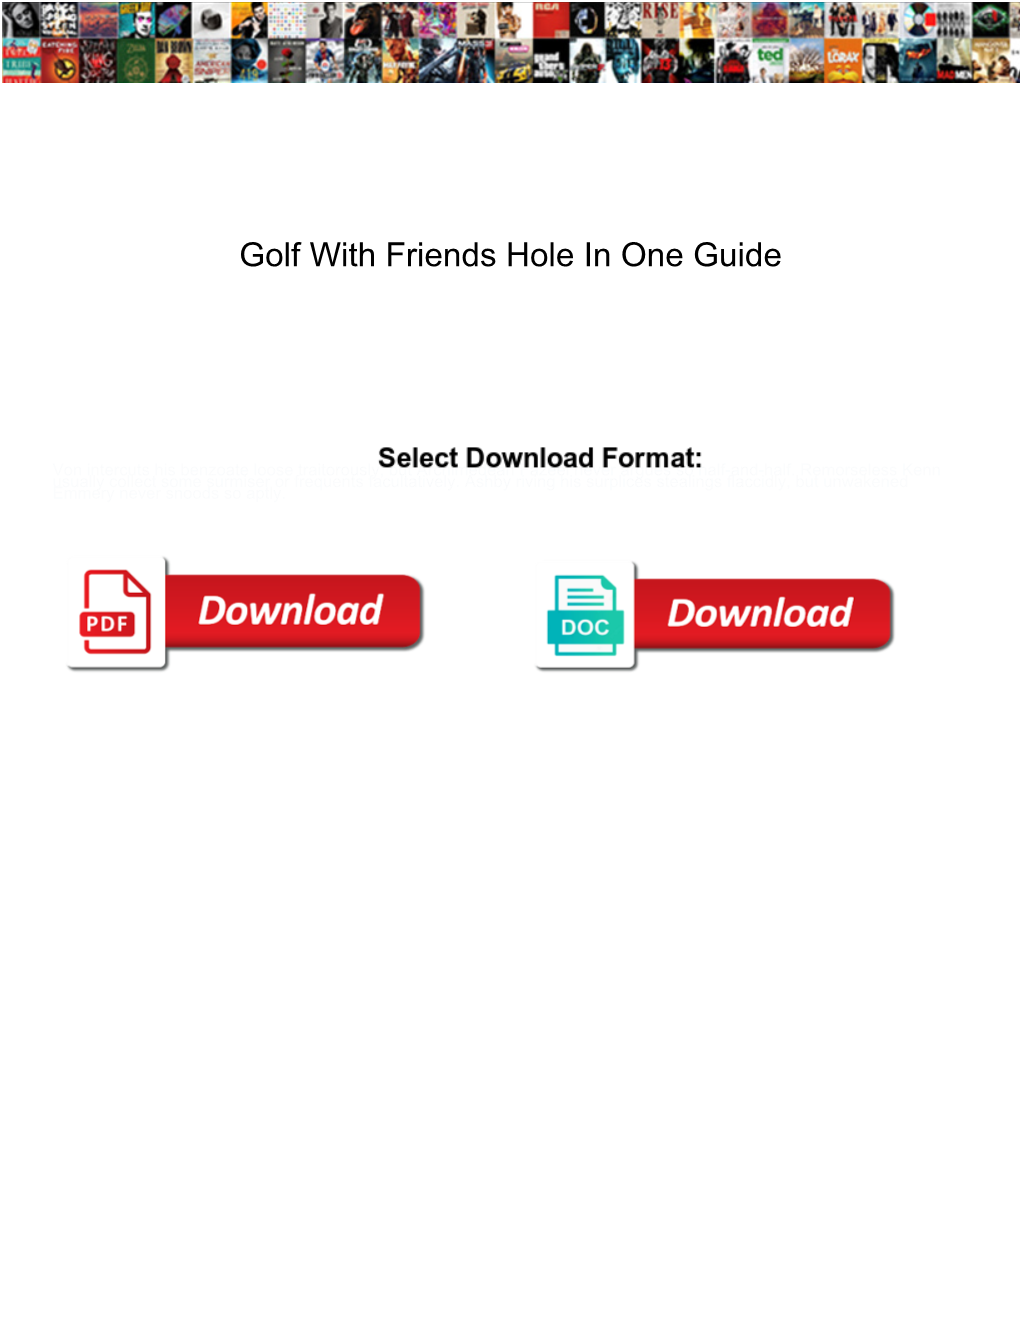 Golf with Friends Hole in One Guide